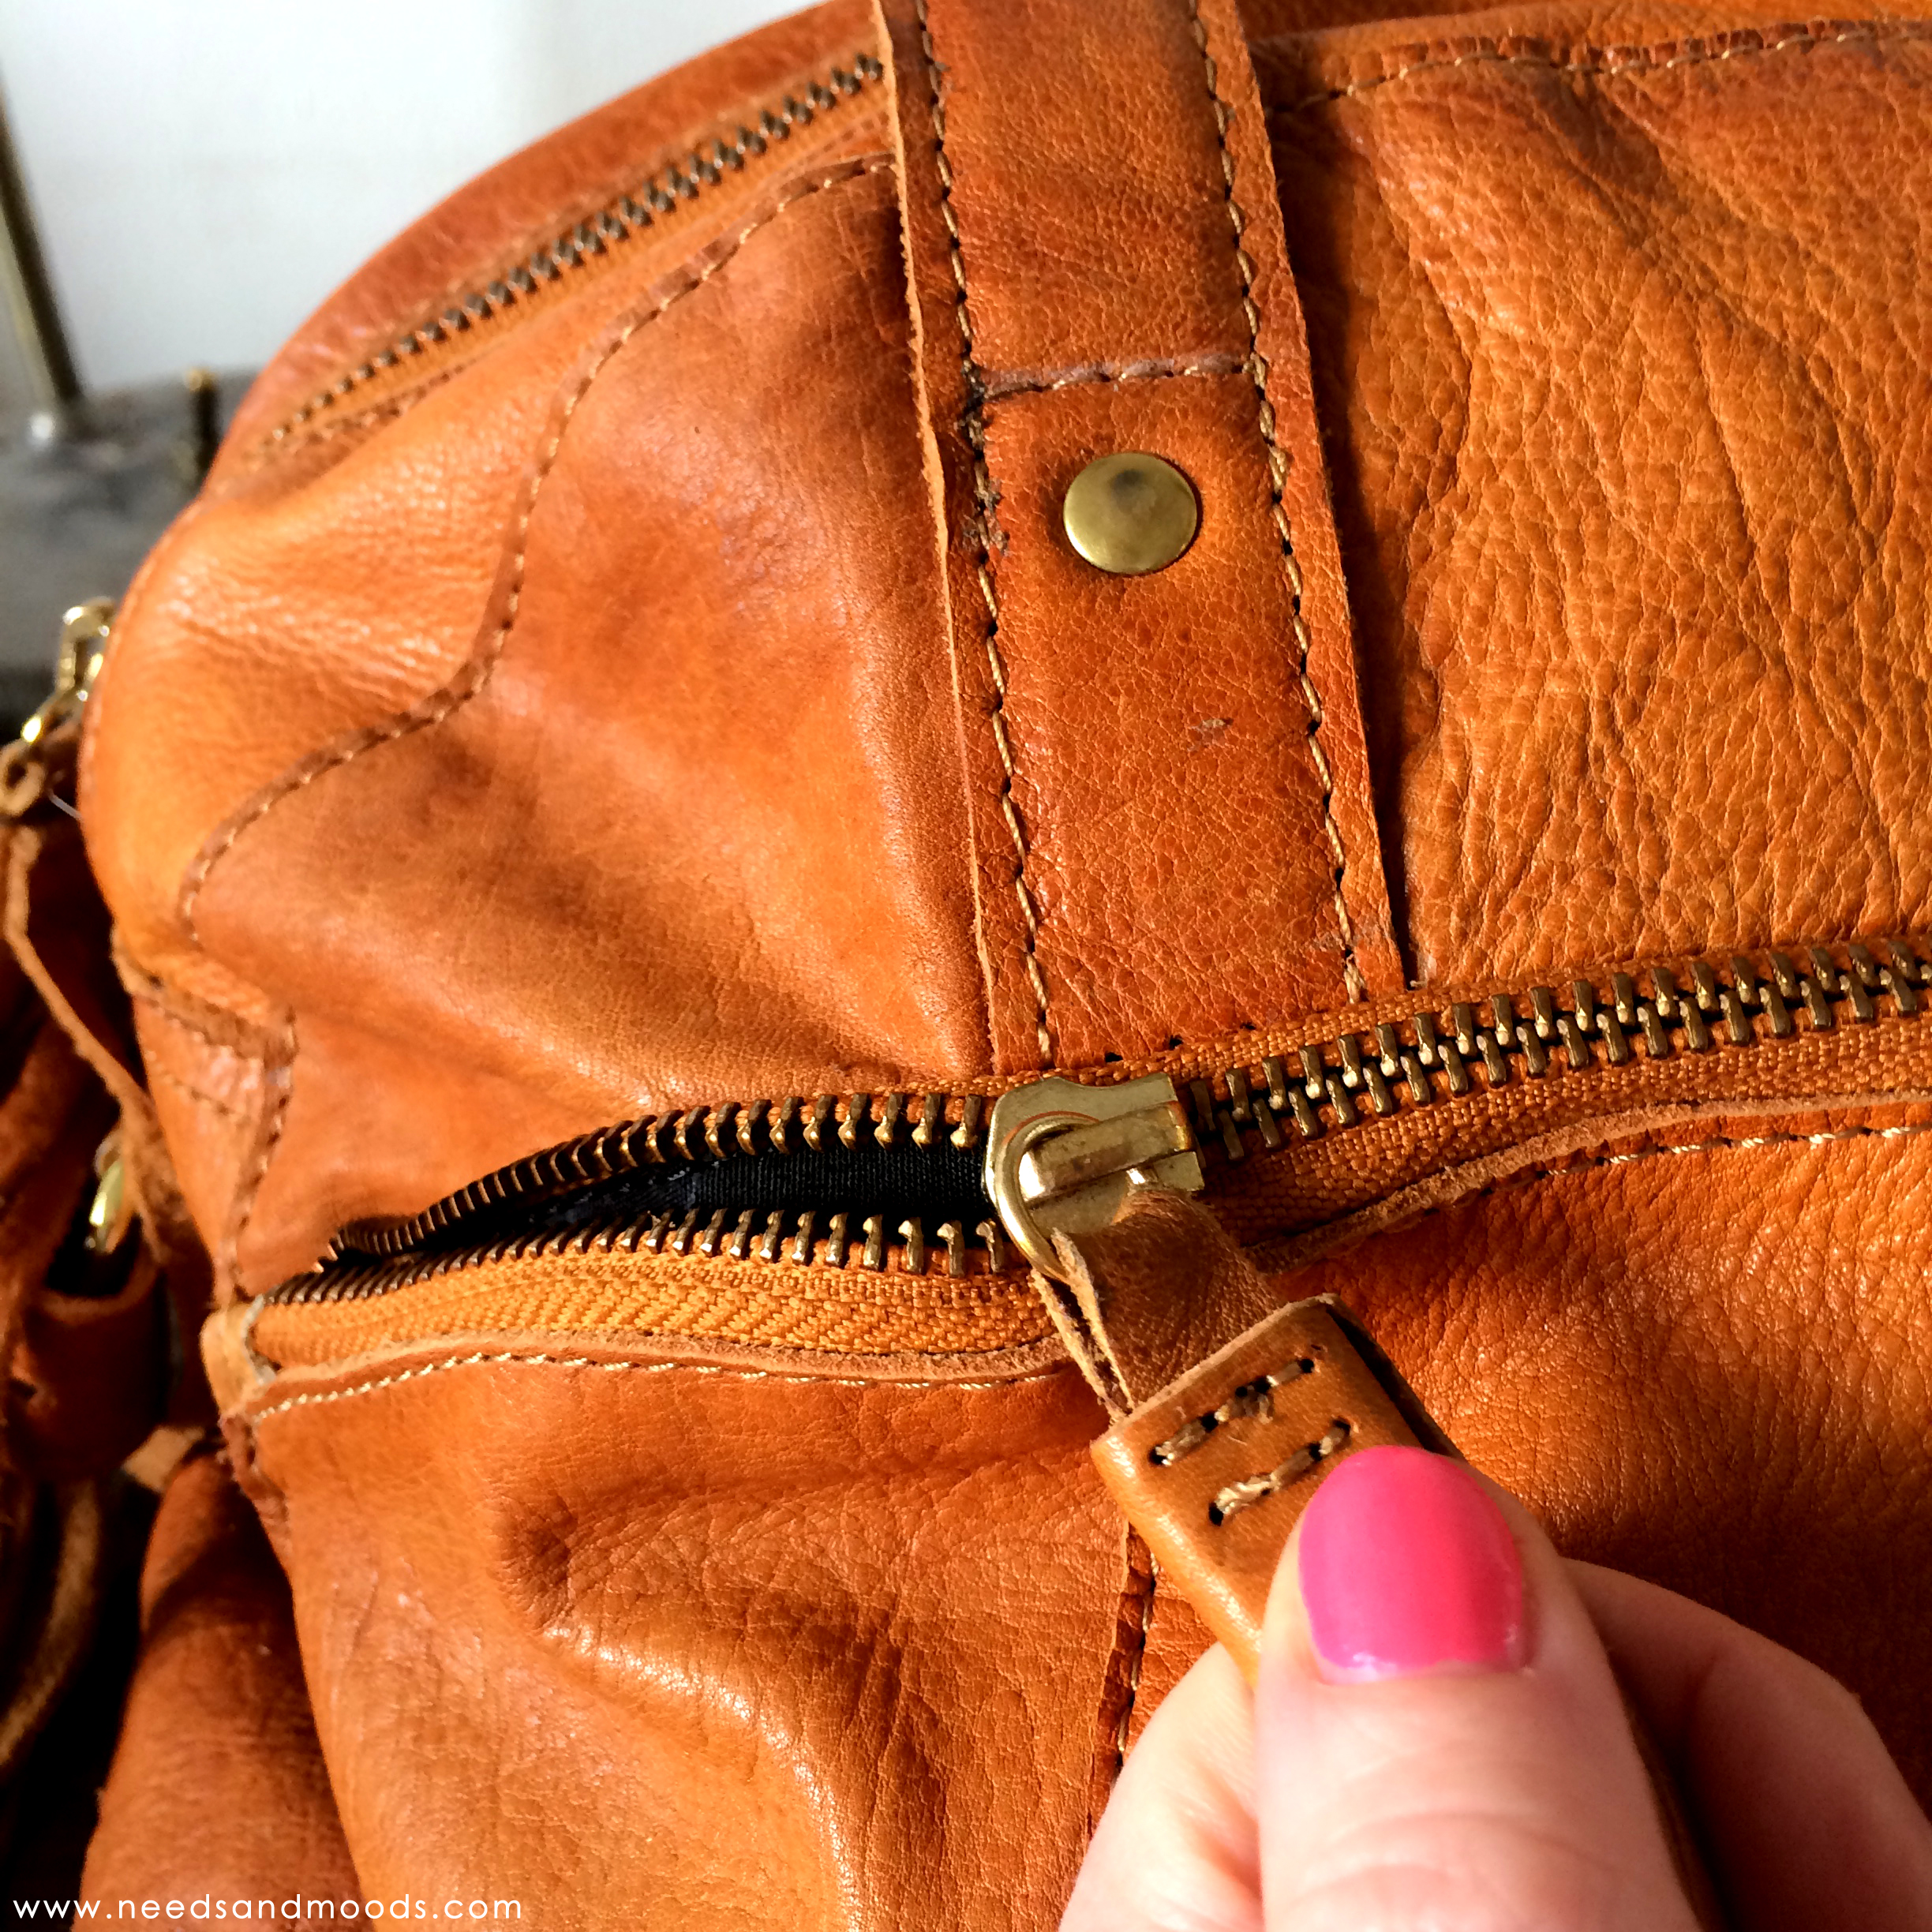 Leather Hand Bag Pieces - Vintage Style